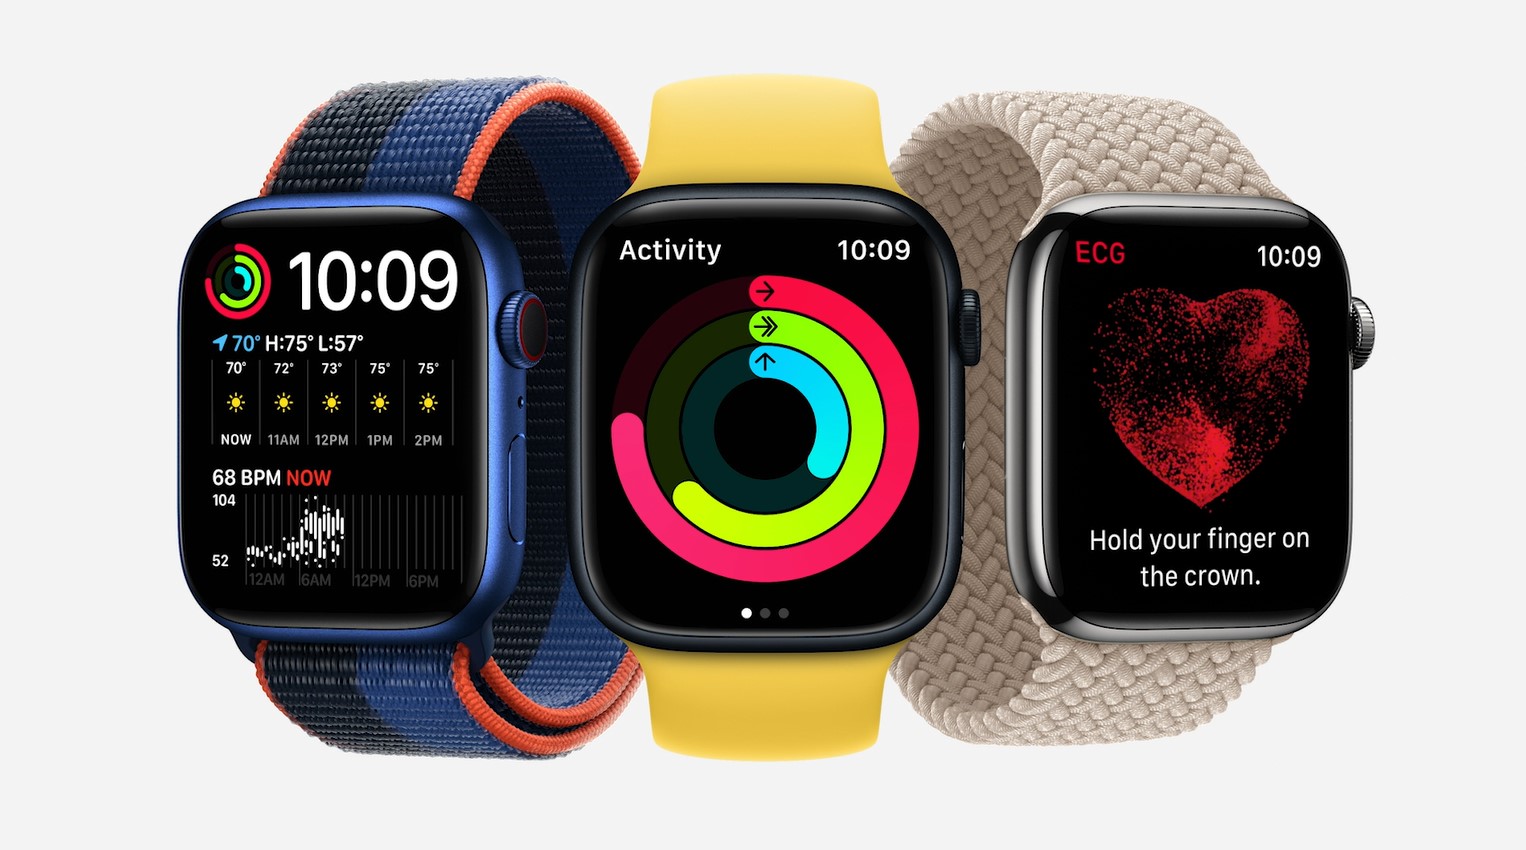 three Apple Watches. The watch on the left side has a blue, black and orange band. The watch in the middle has a yellow rubber band. The watch on the right features a beige woven band.